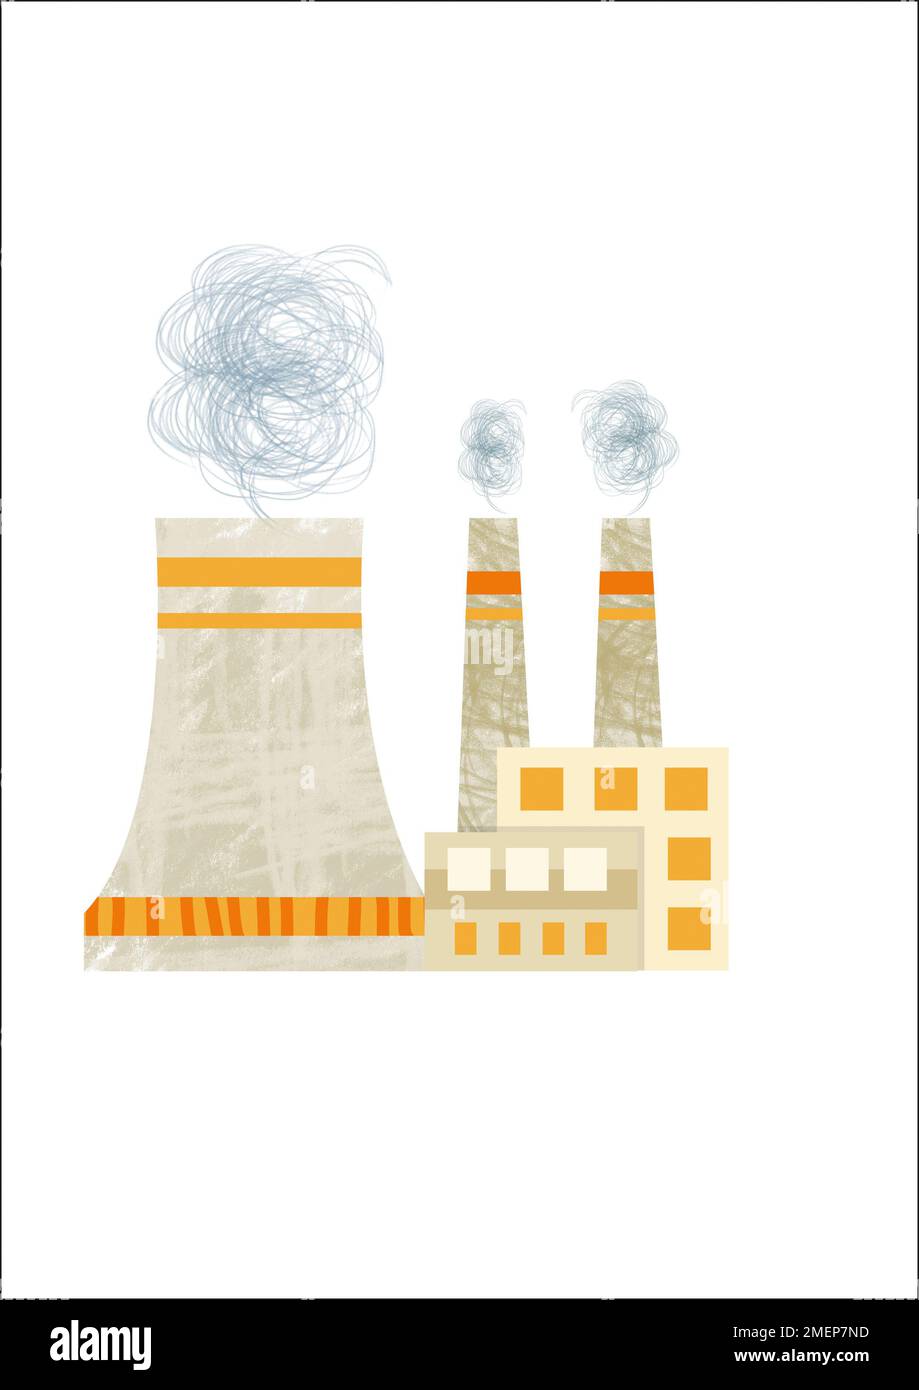 Illustration of factory with smoke coming from towers Stock Photo